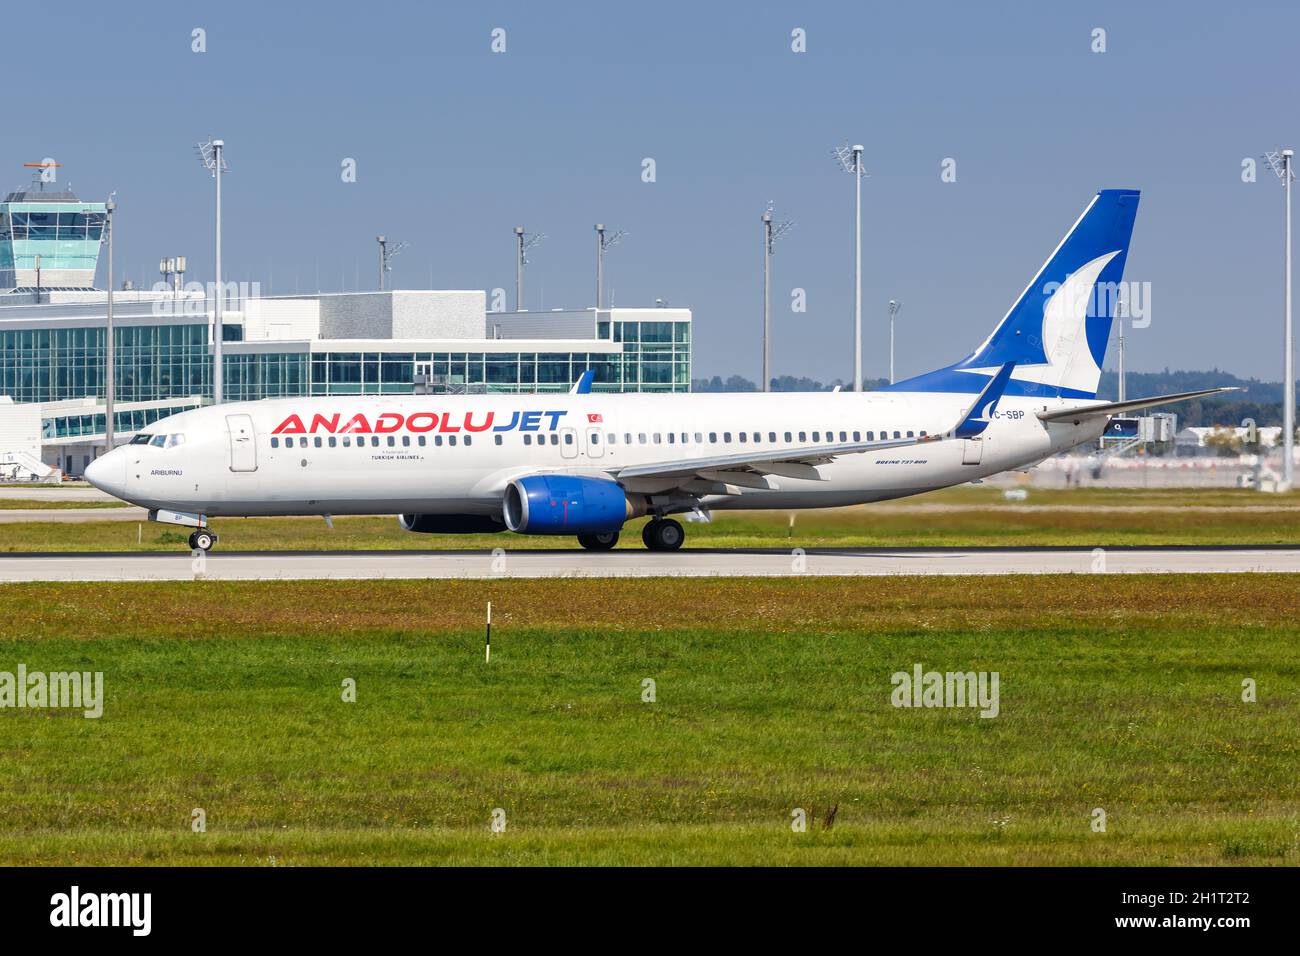 Munich, Germany - September 9, 2021: AnadoluJet Boeing 737-800 airplane at Munich airport (MUC) in Germany. Stock Photo